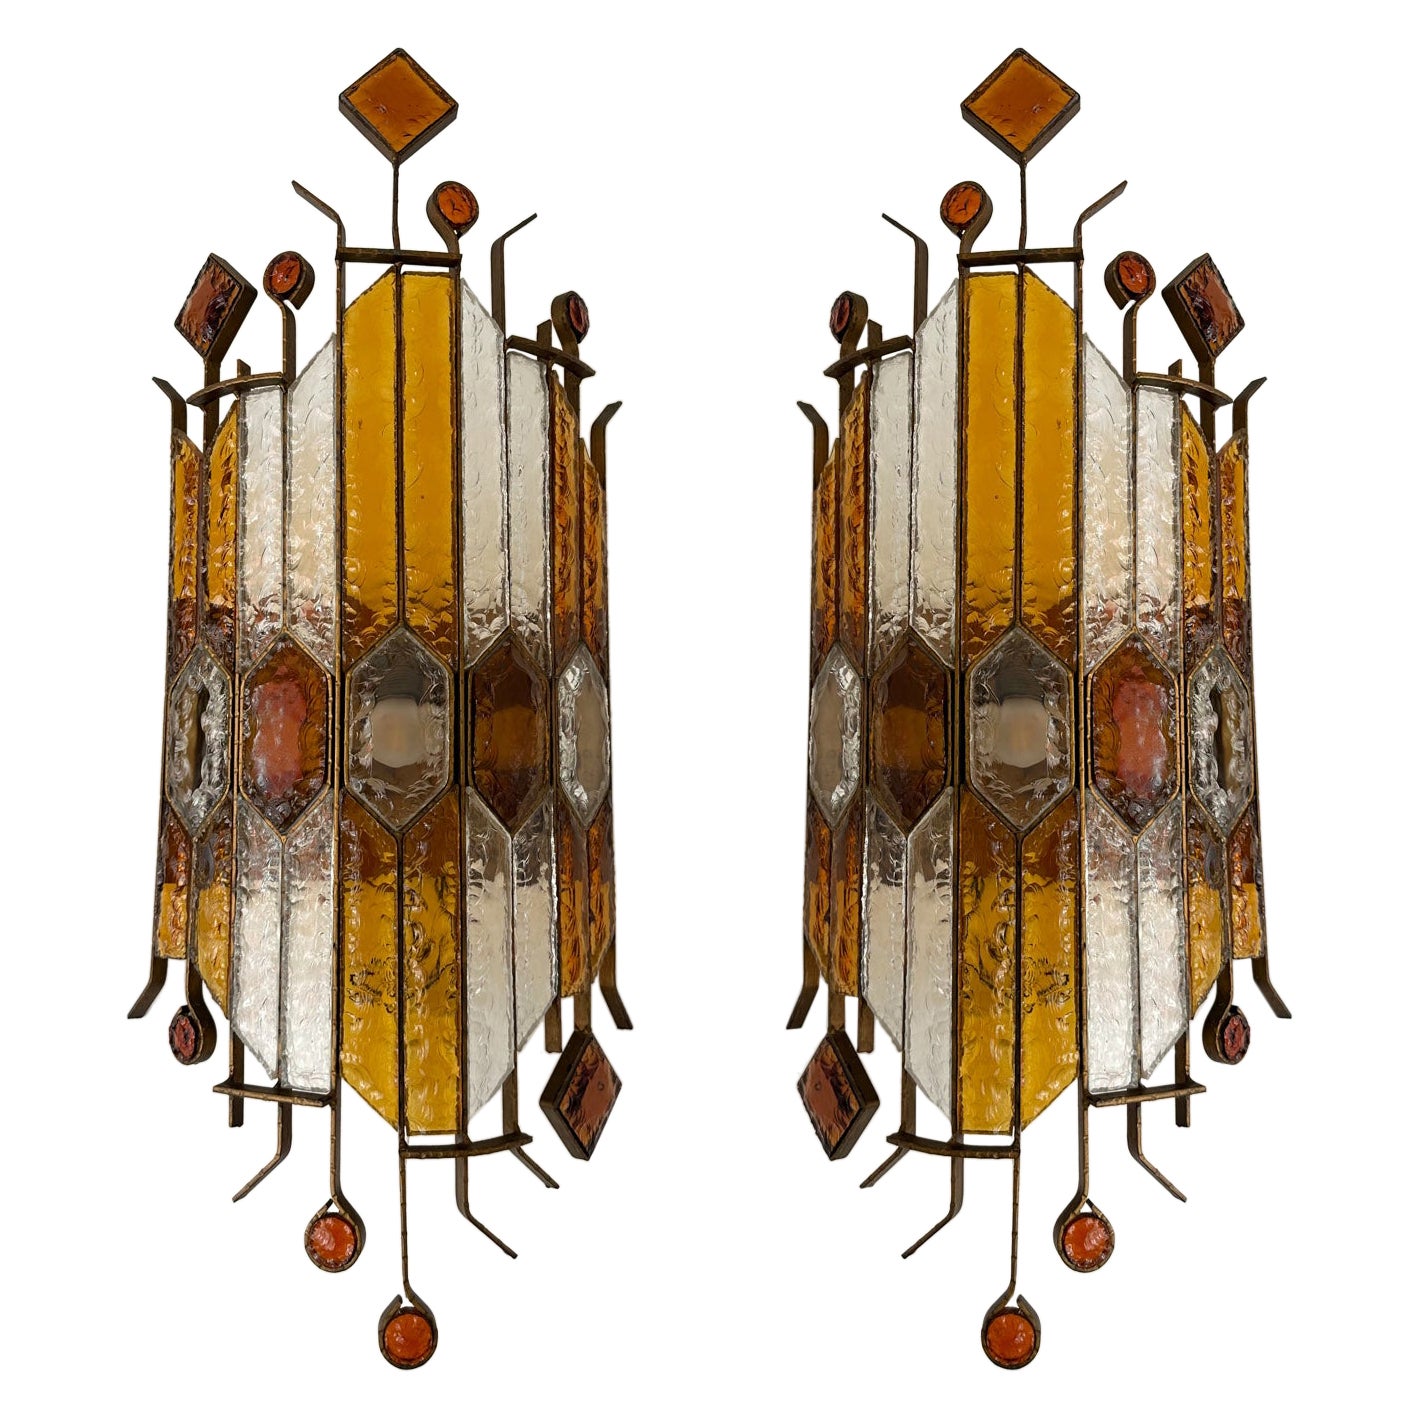 Pair of Large Hammered Glass Wrought Iron Sconces by Longobard, Italy, 1970s